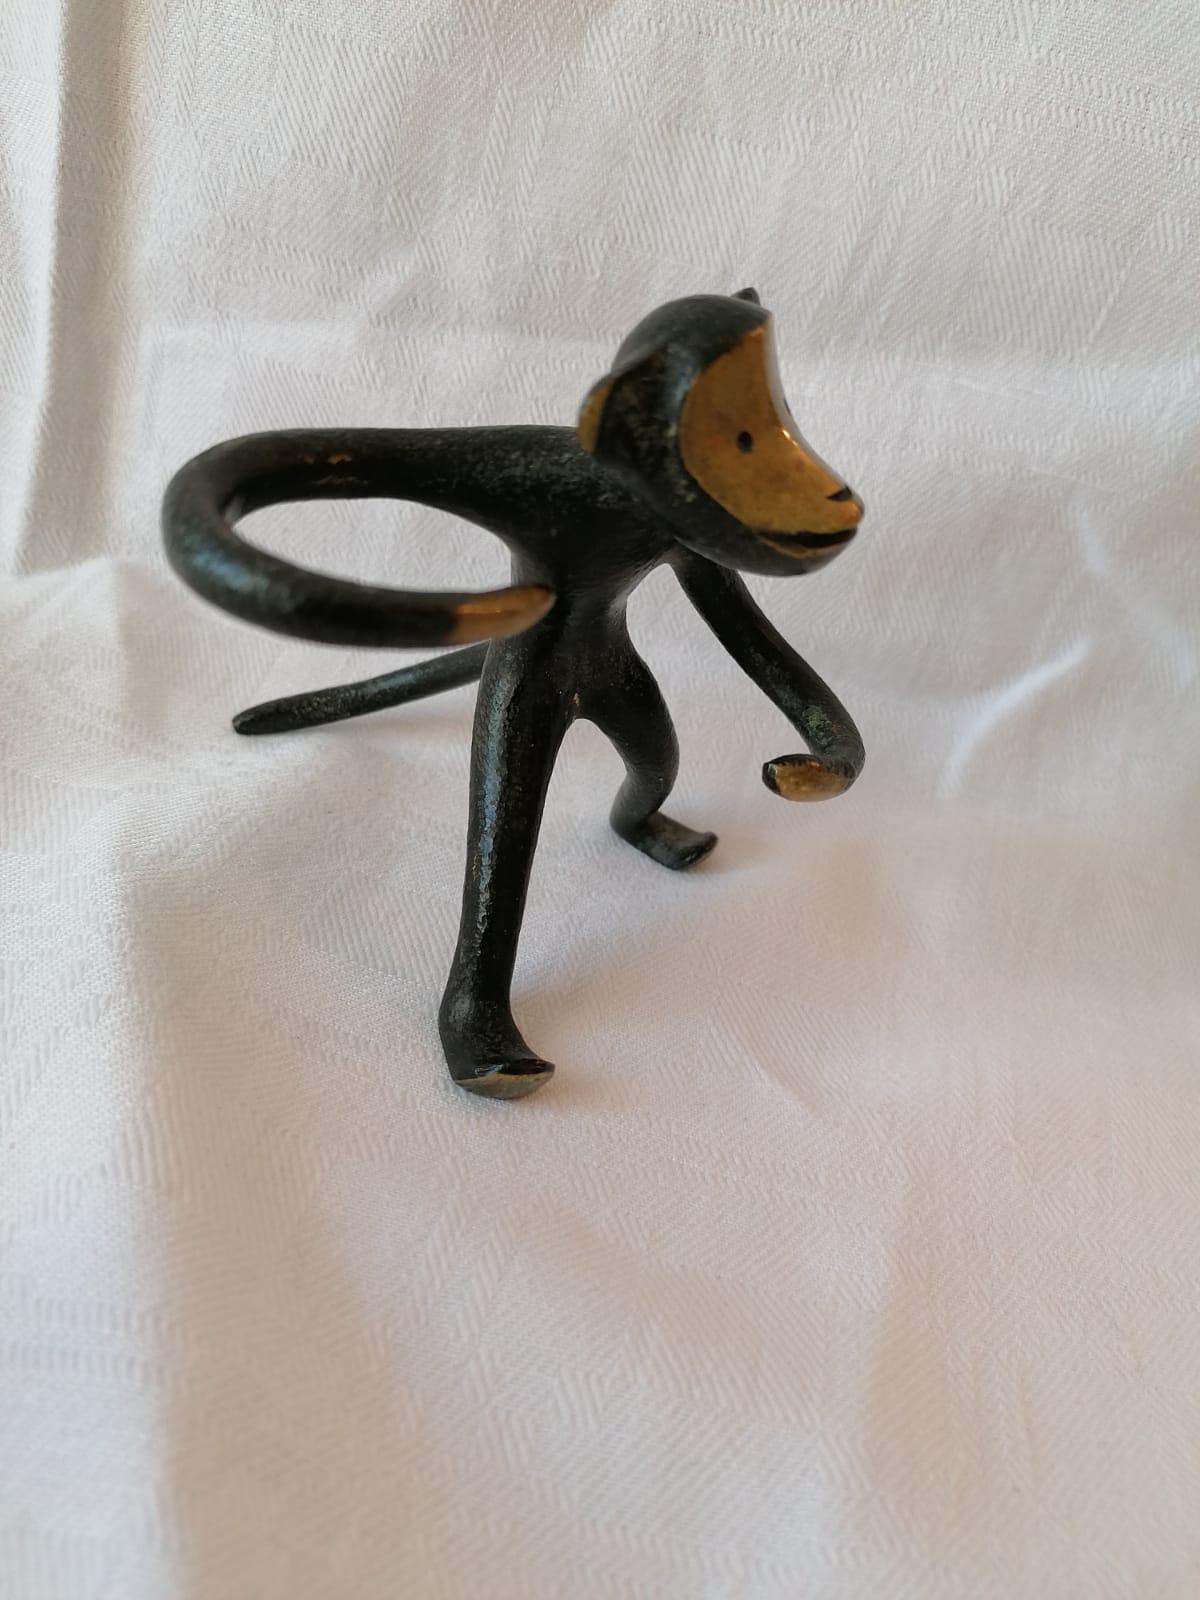 Brass figurine blackened monkey with a salt pepper Shaker. Designed in the 1950s by Walter Bosse for Hertha Baller Austria.
Excellent original condition.